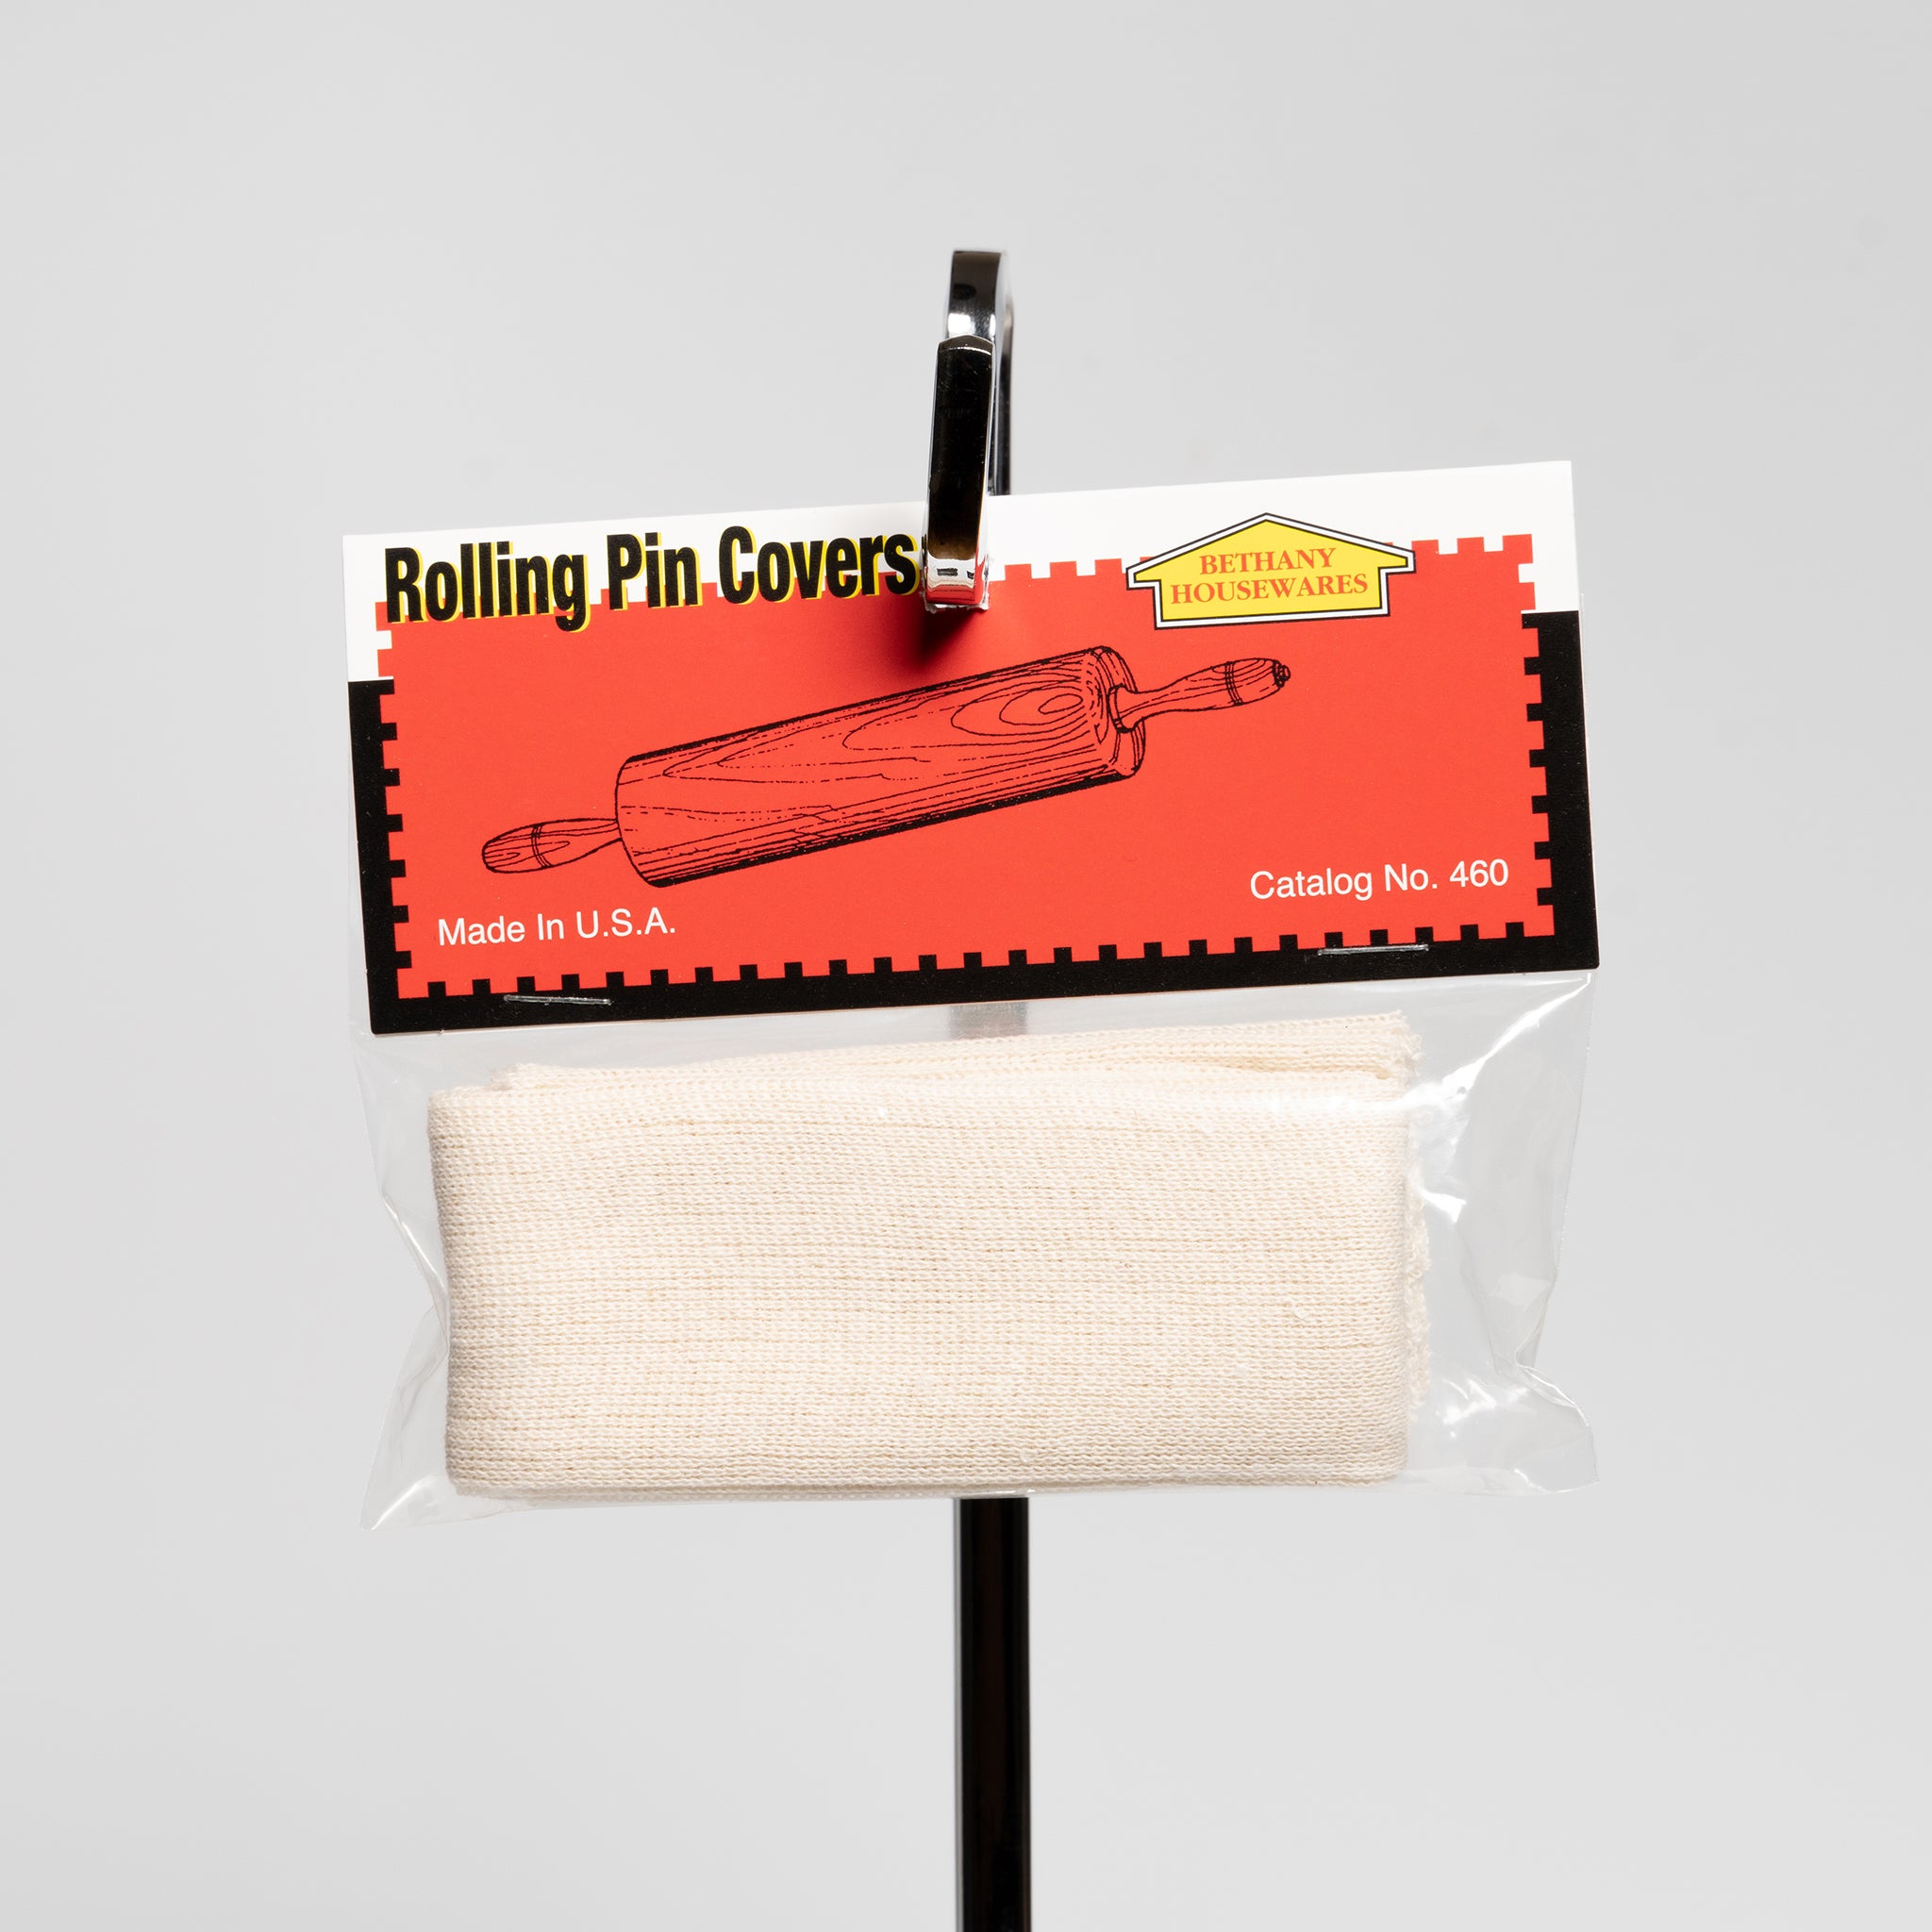 Rolling Pin Covers by Bethany Housewares